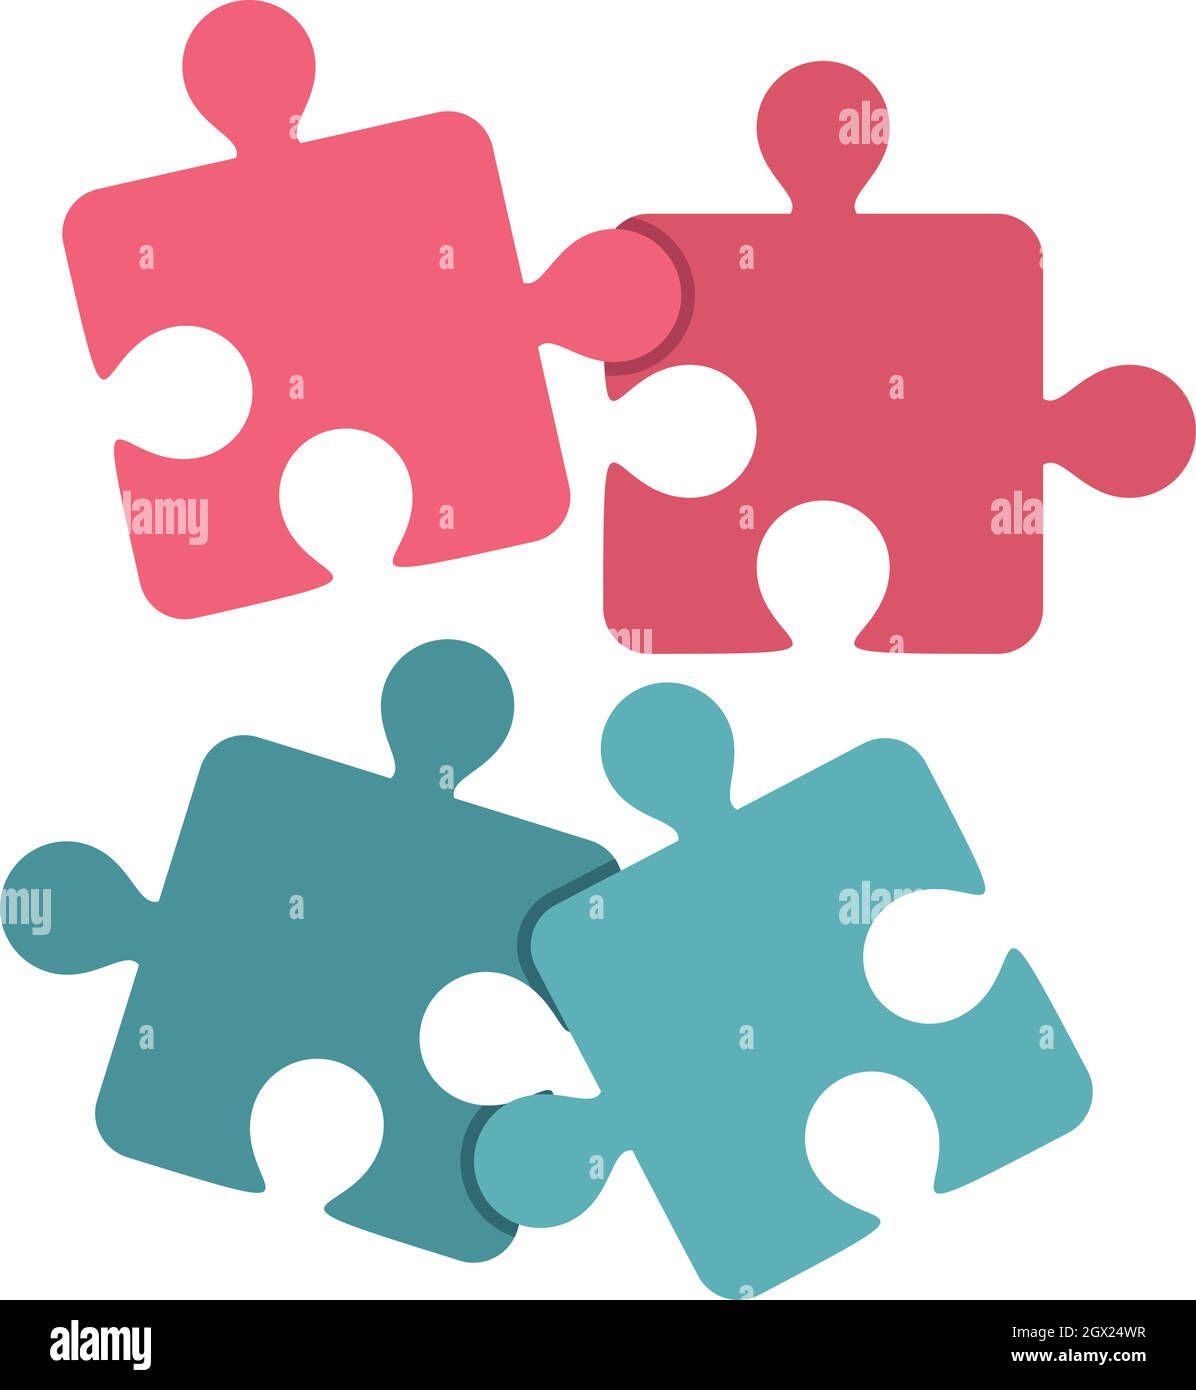 Jigsaw puzzles icon, flat style Stock Vector